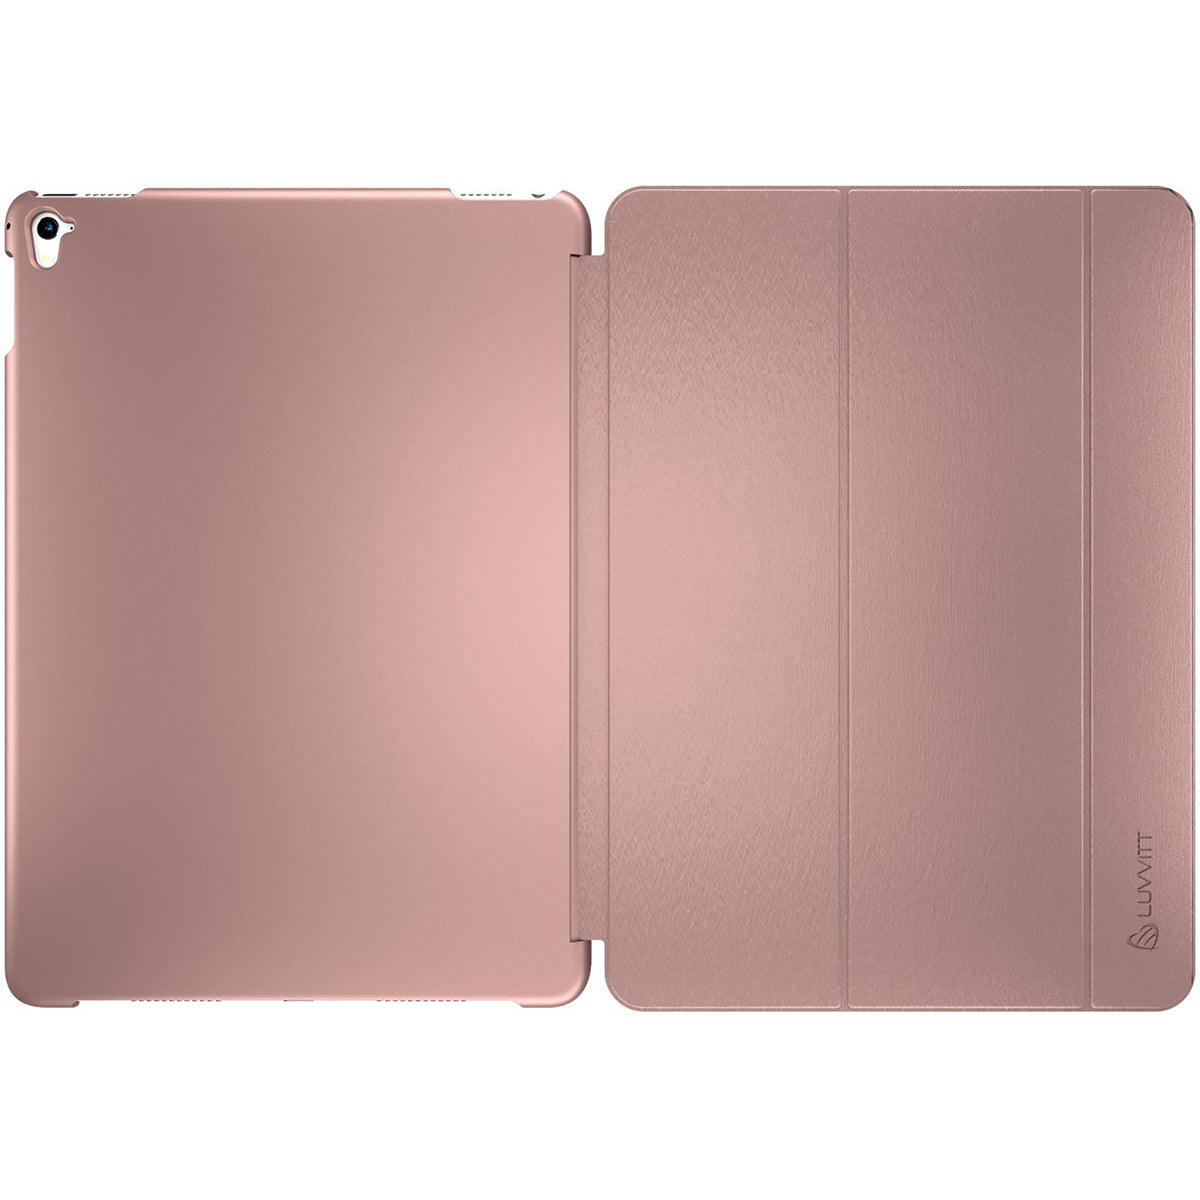 LUVVITT RESCUE Case Full Front and Back Cover for iPad Pro 12.9 Rose Gold 2017